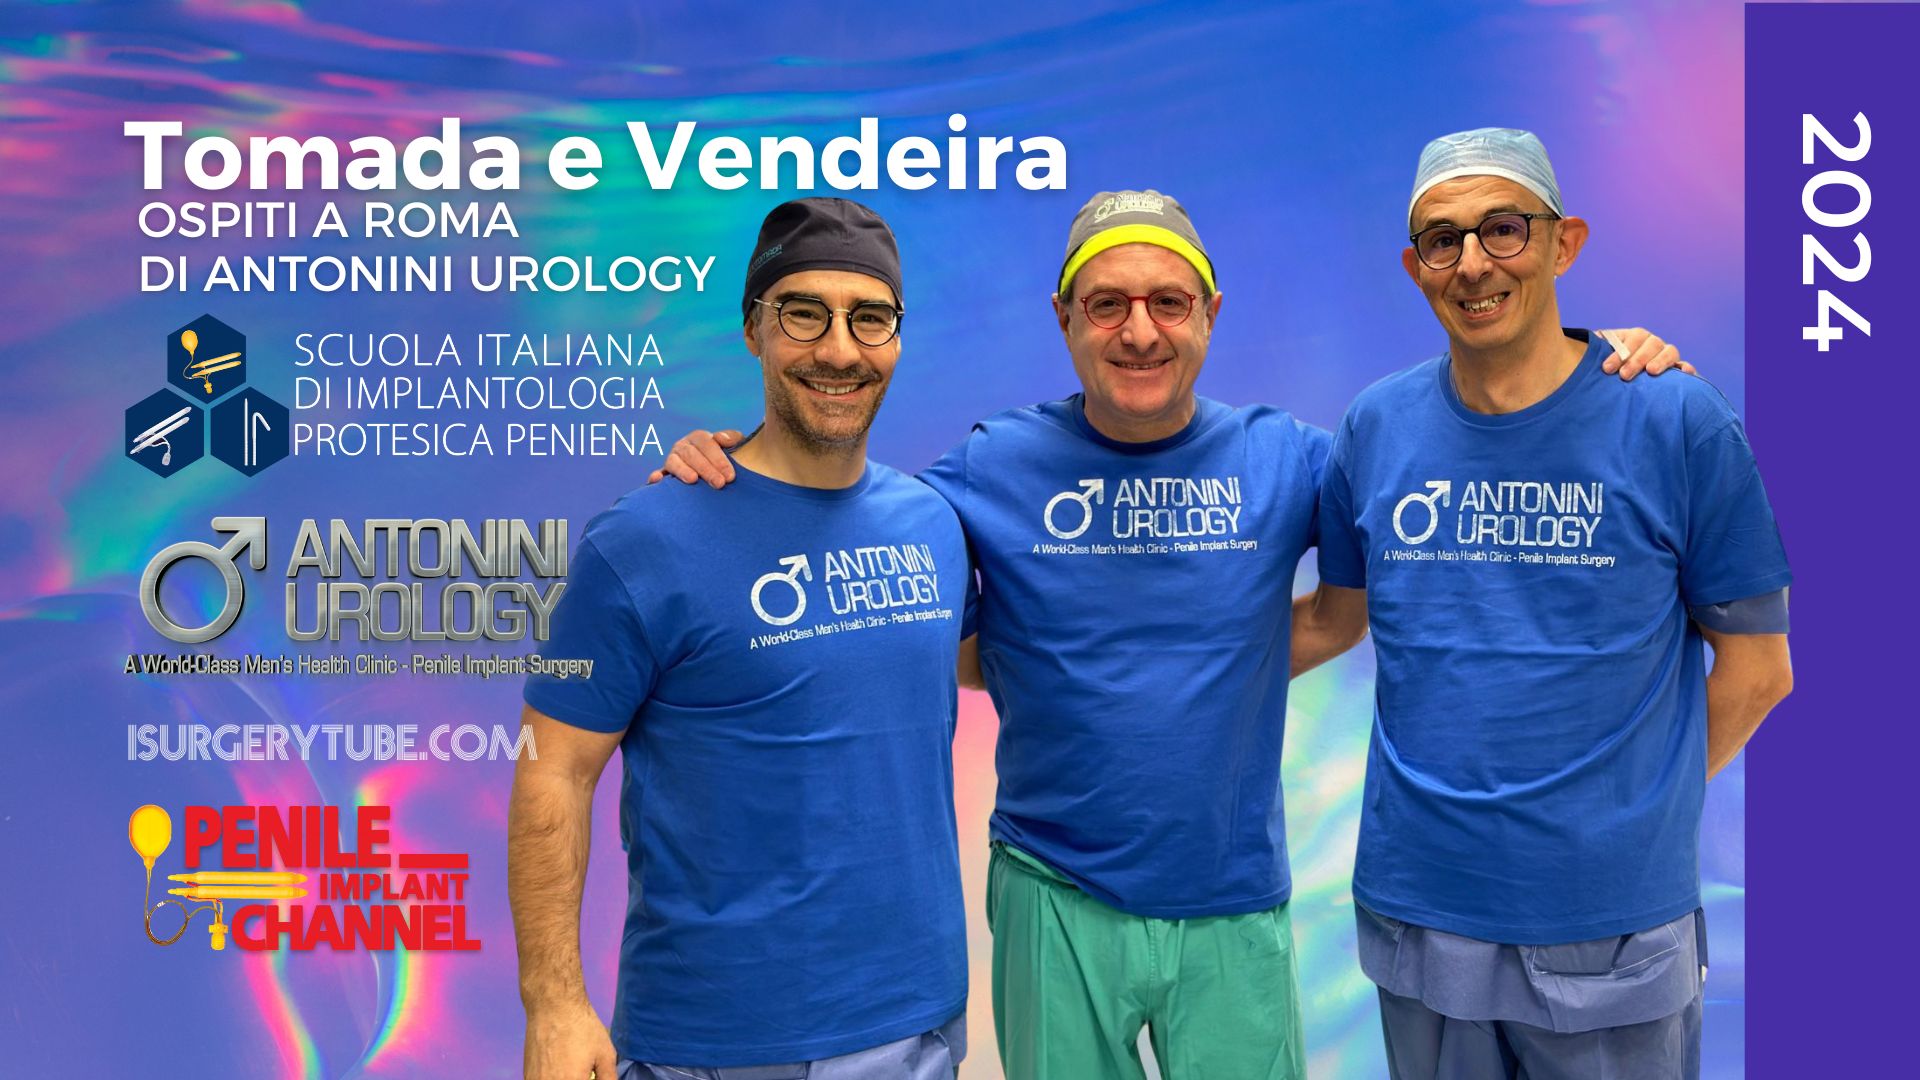 Tomada and Vendeira as Guests in Rome by Antonini Urology